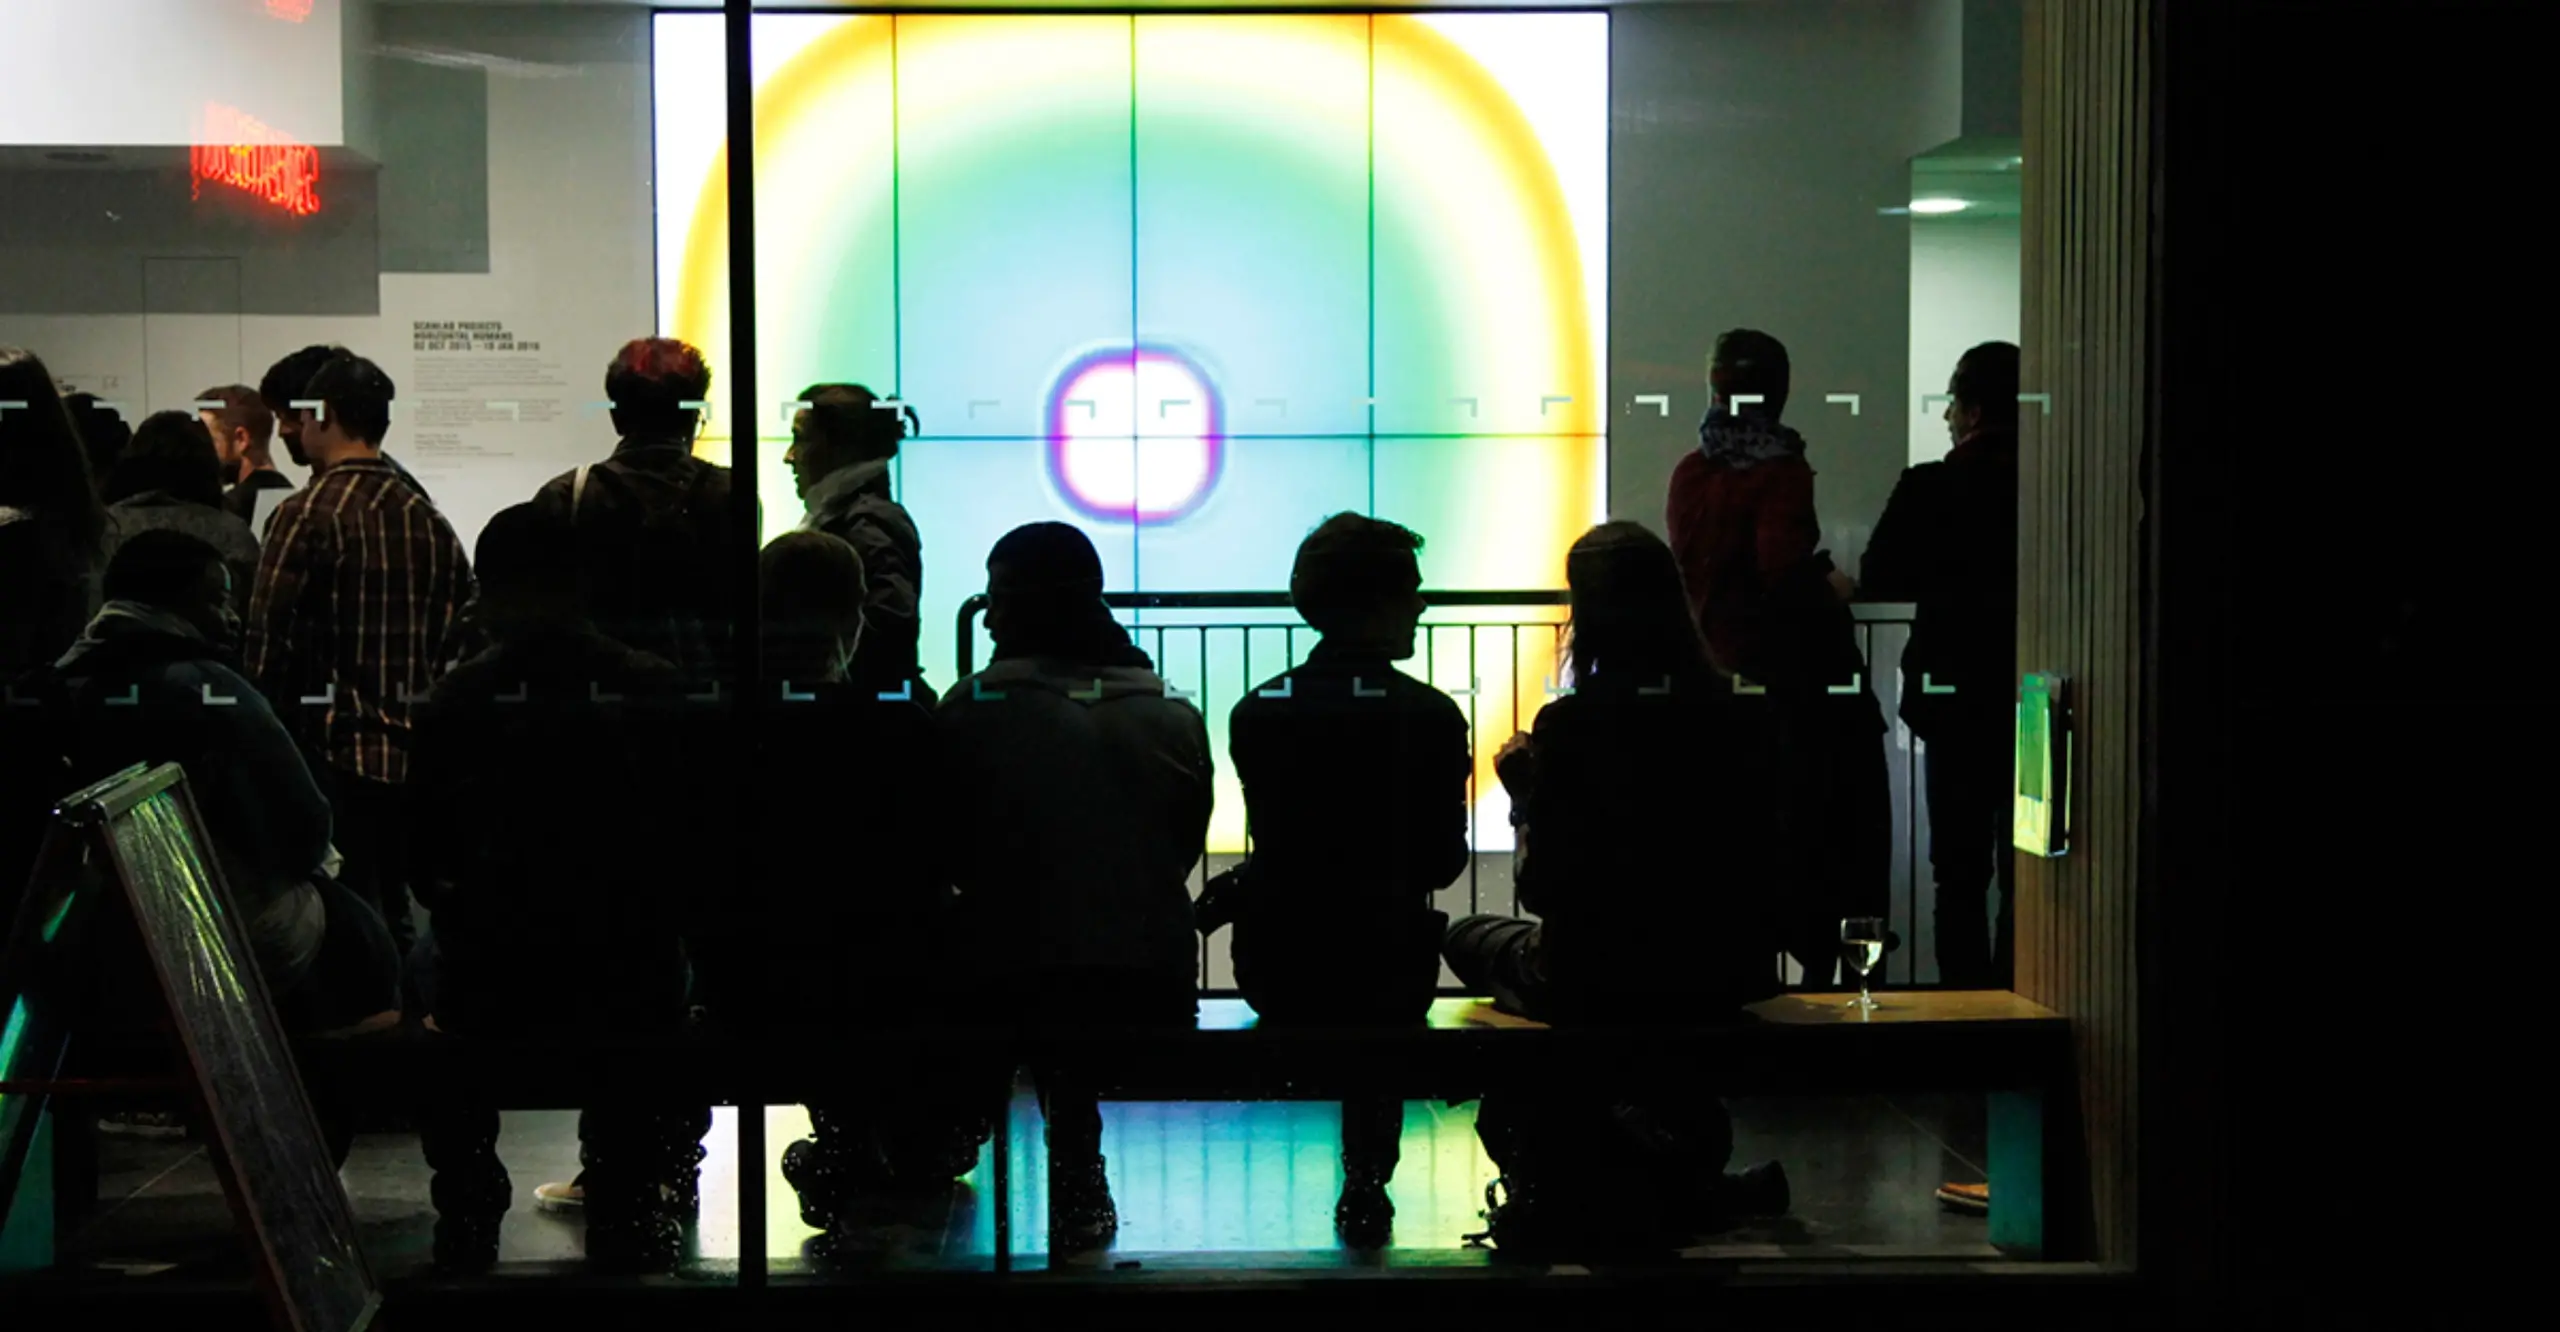 A group of people sitting on a bench against a big screen showing a yellow and green circle